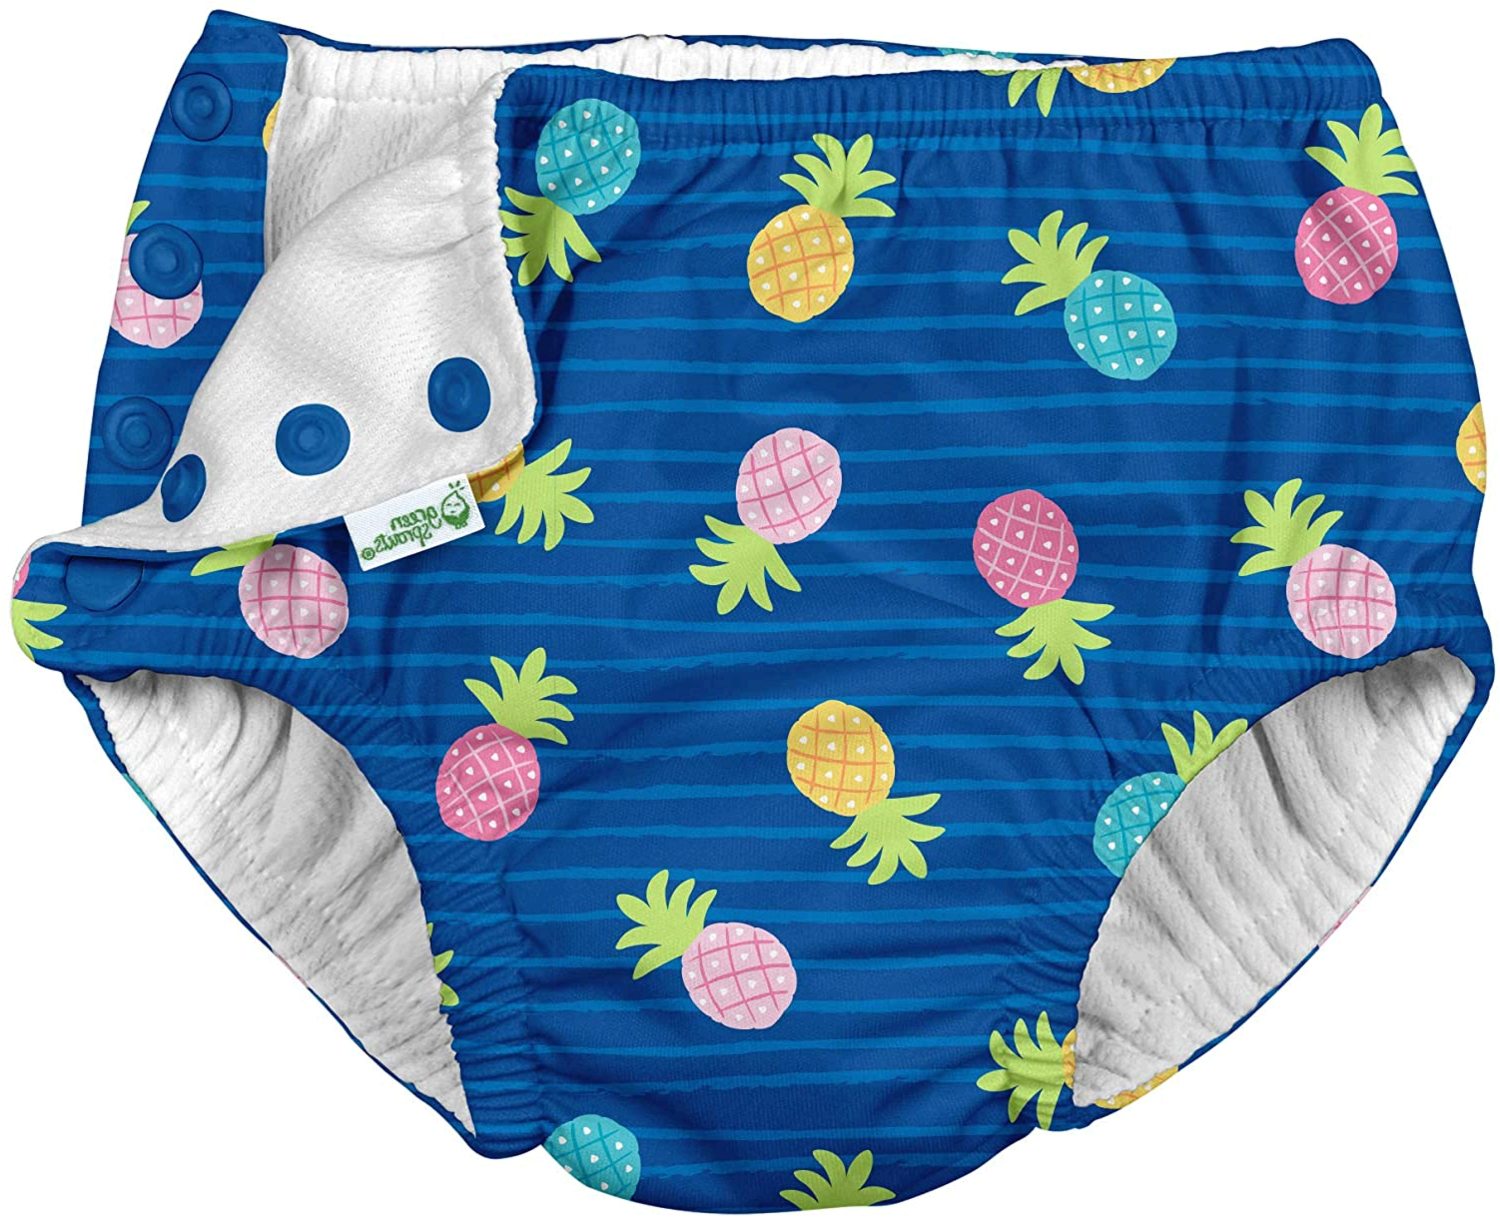 Iplay Swim Diapers Size Chart - Girls swim diapers size 6-12 months Lot ...